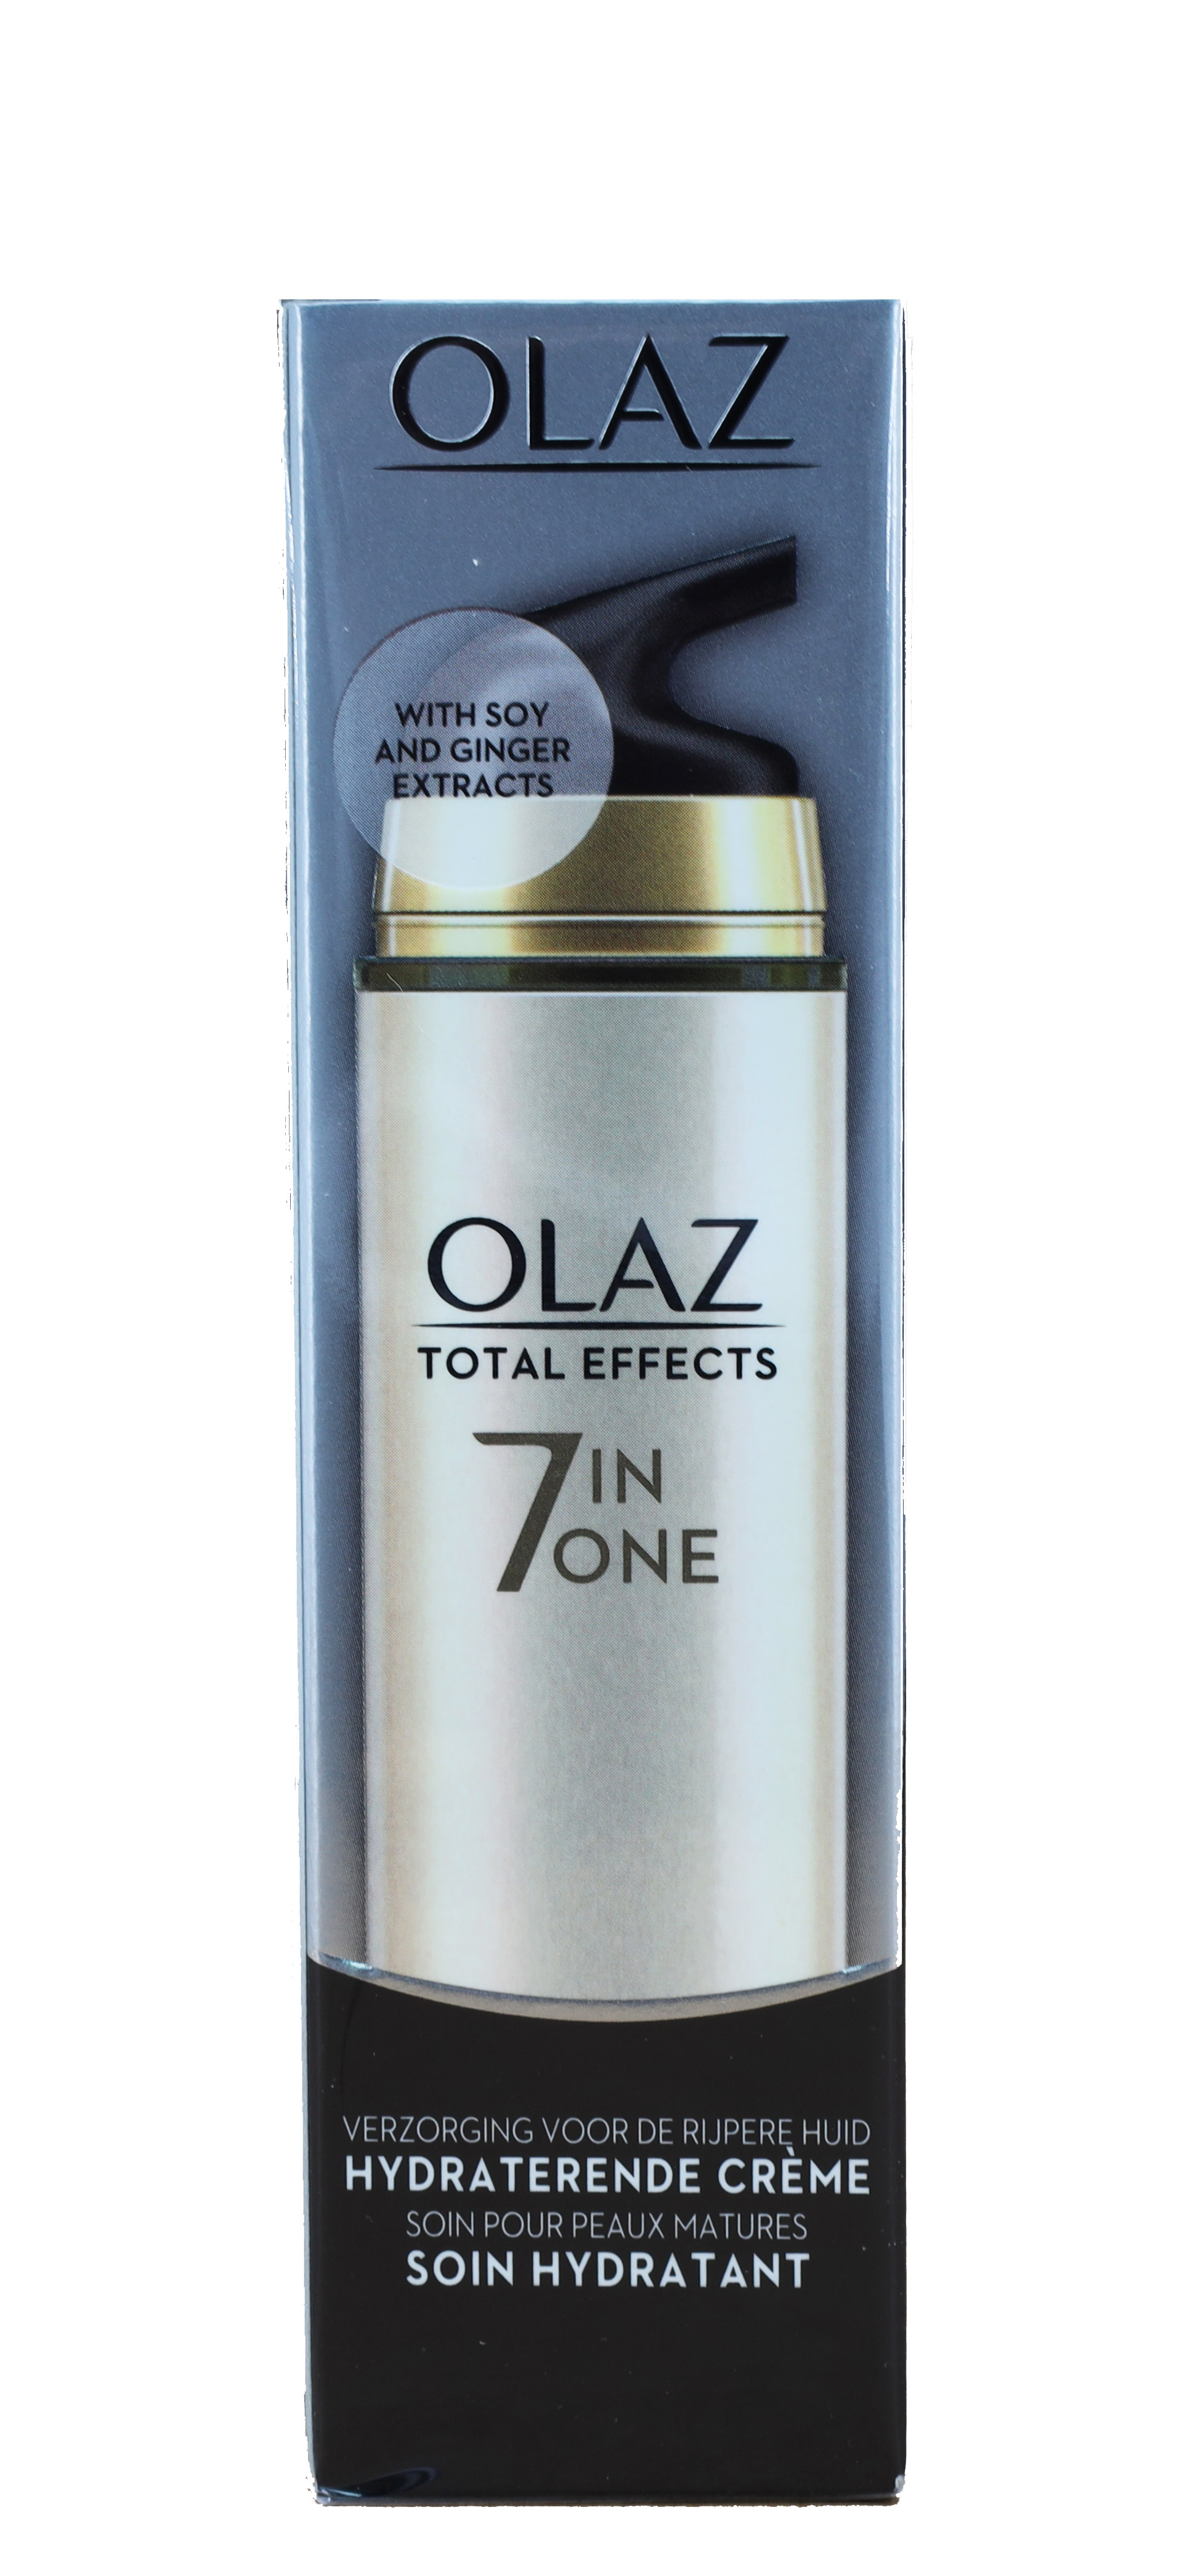 Olaz Total Effects Day Cream 7in1 50ml